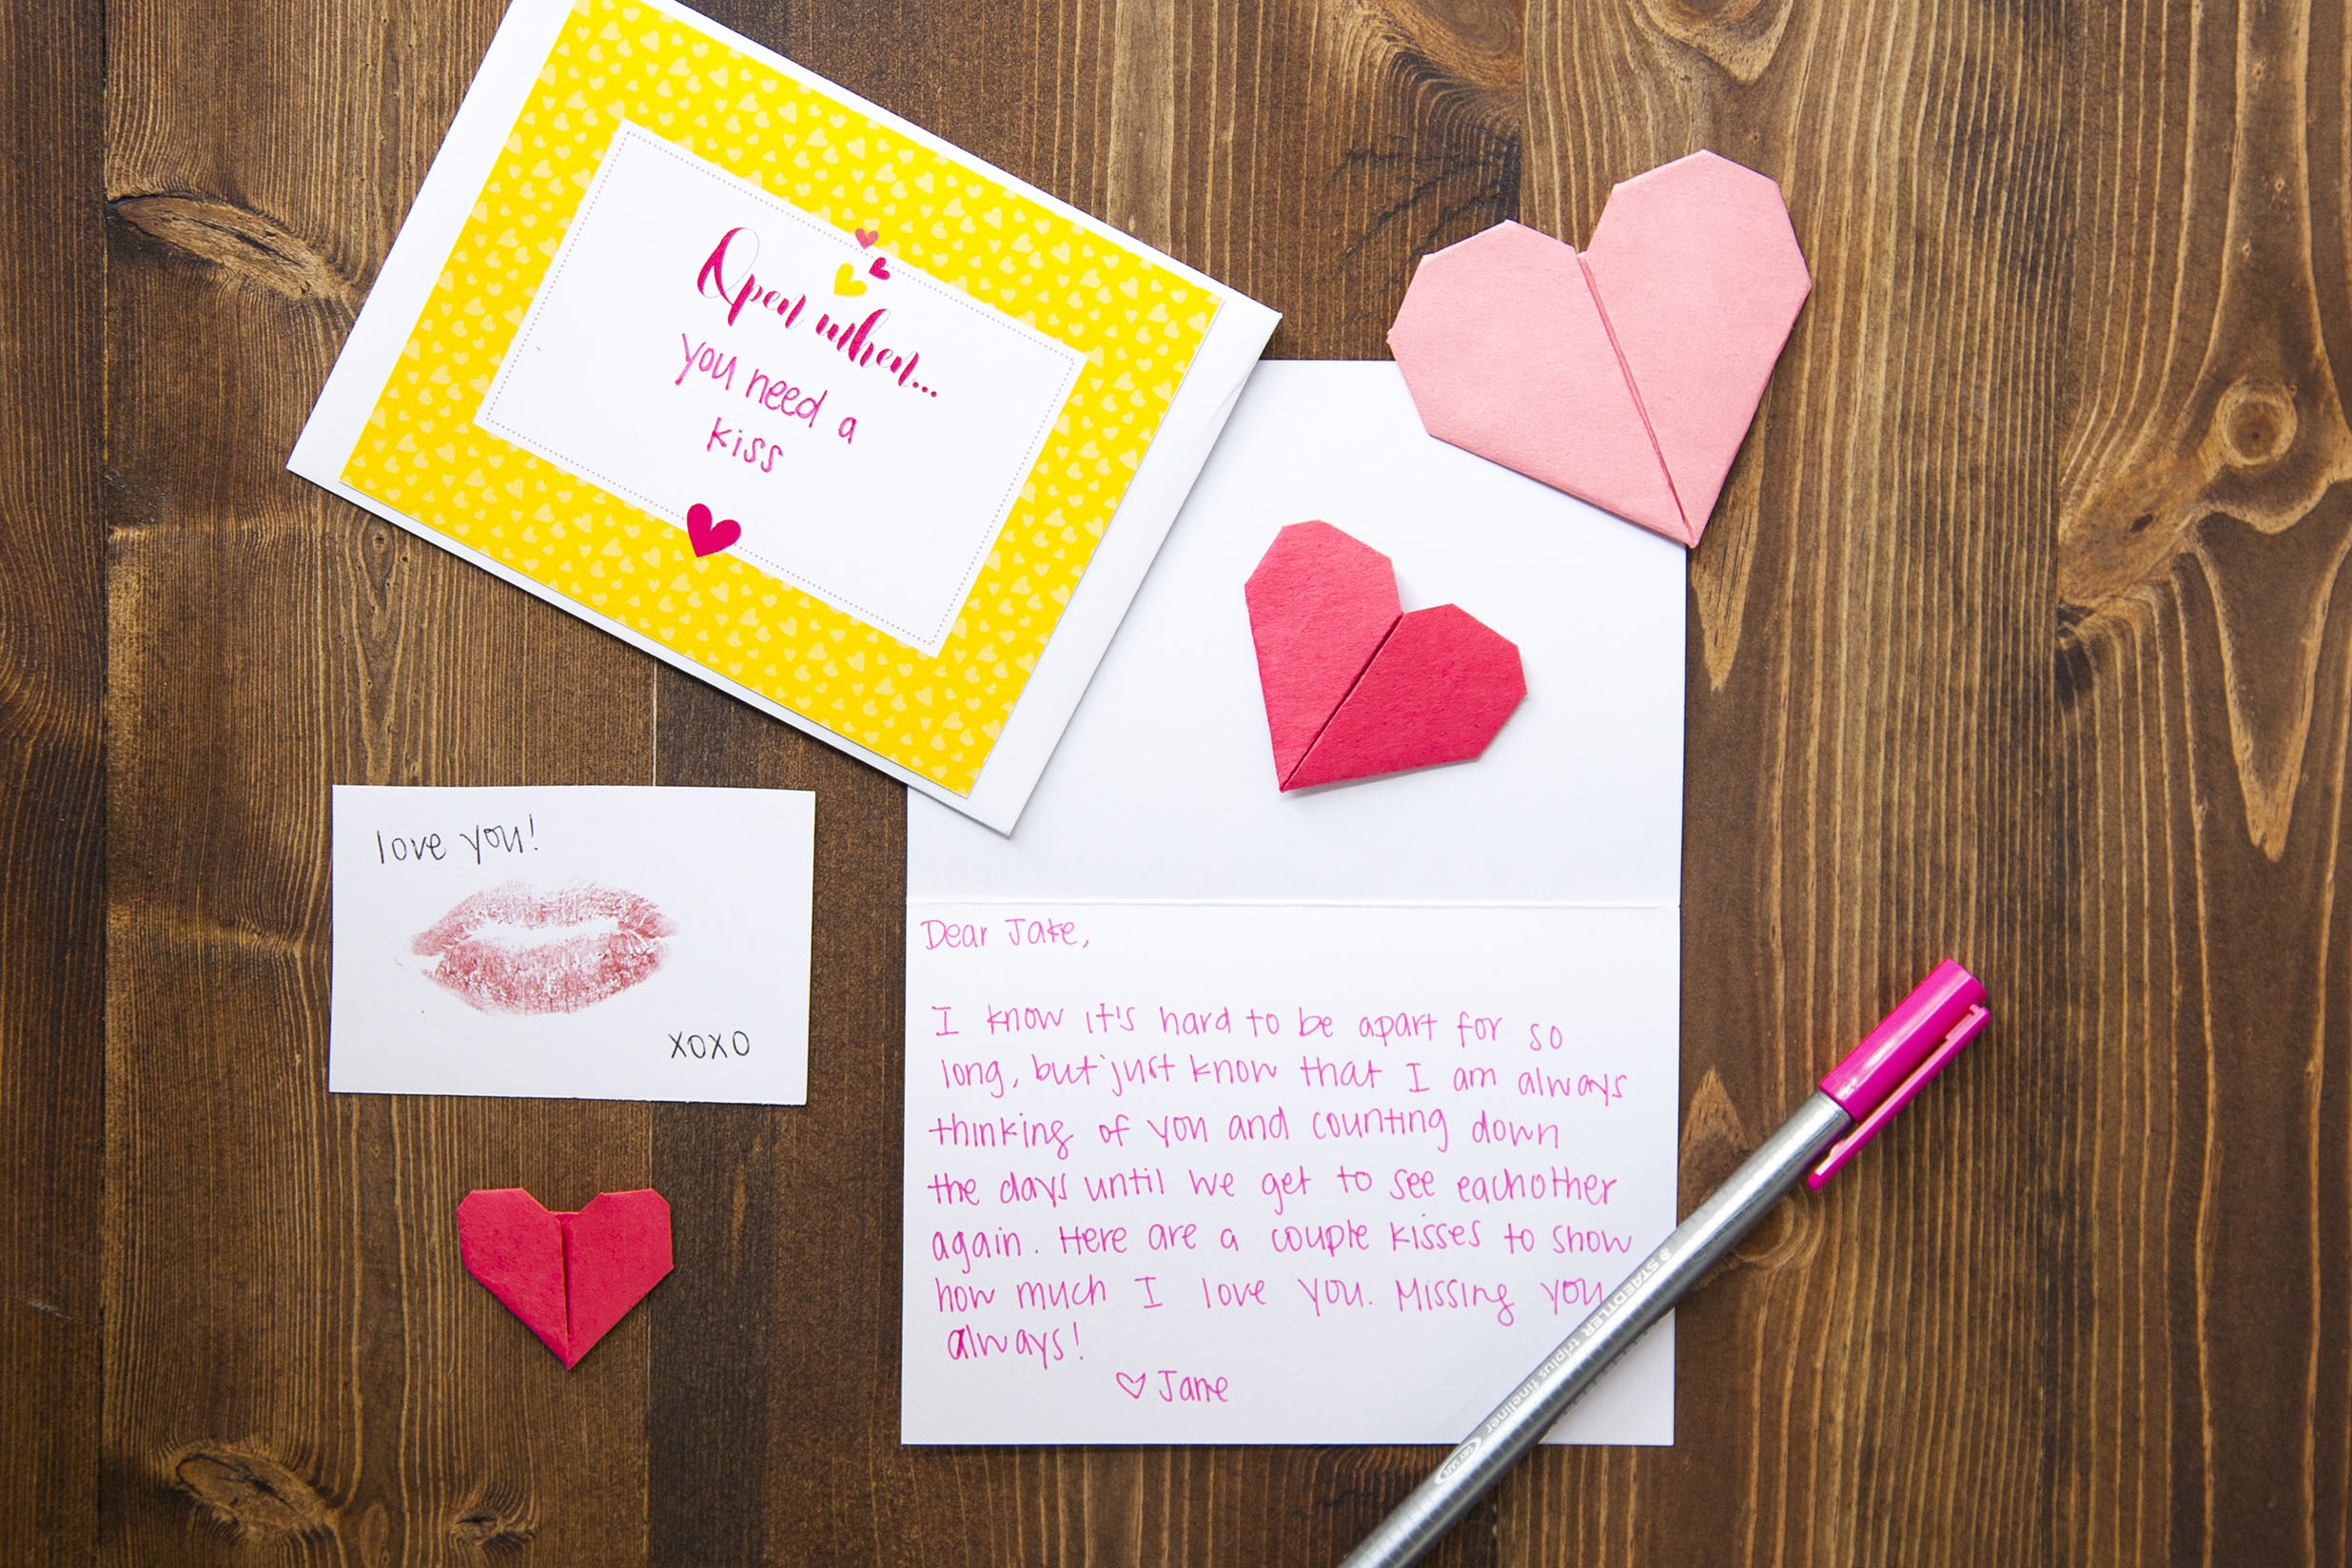 What to put inside open when letters for your boyfriend